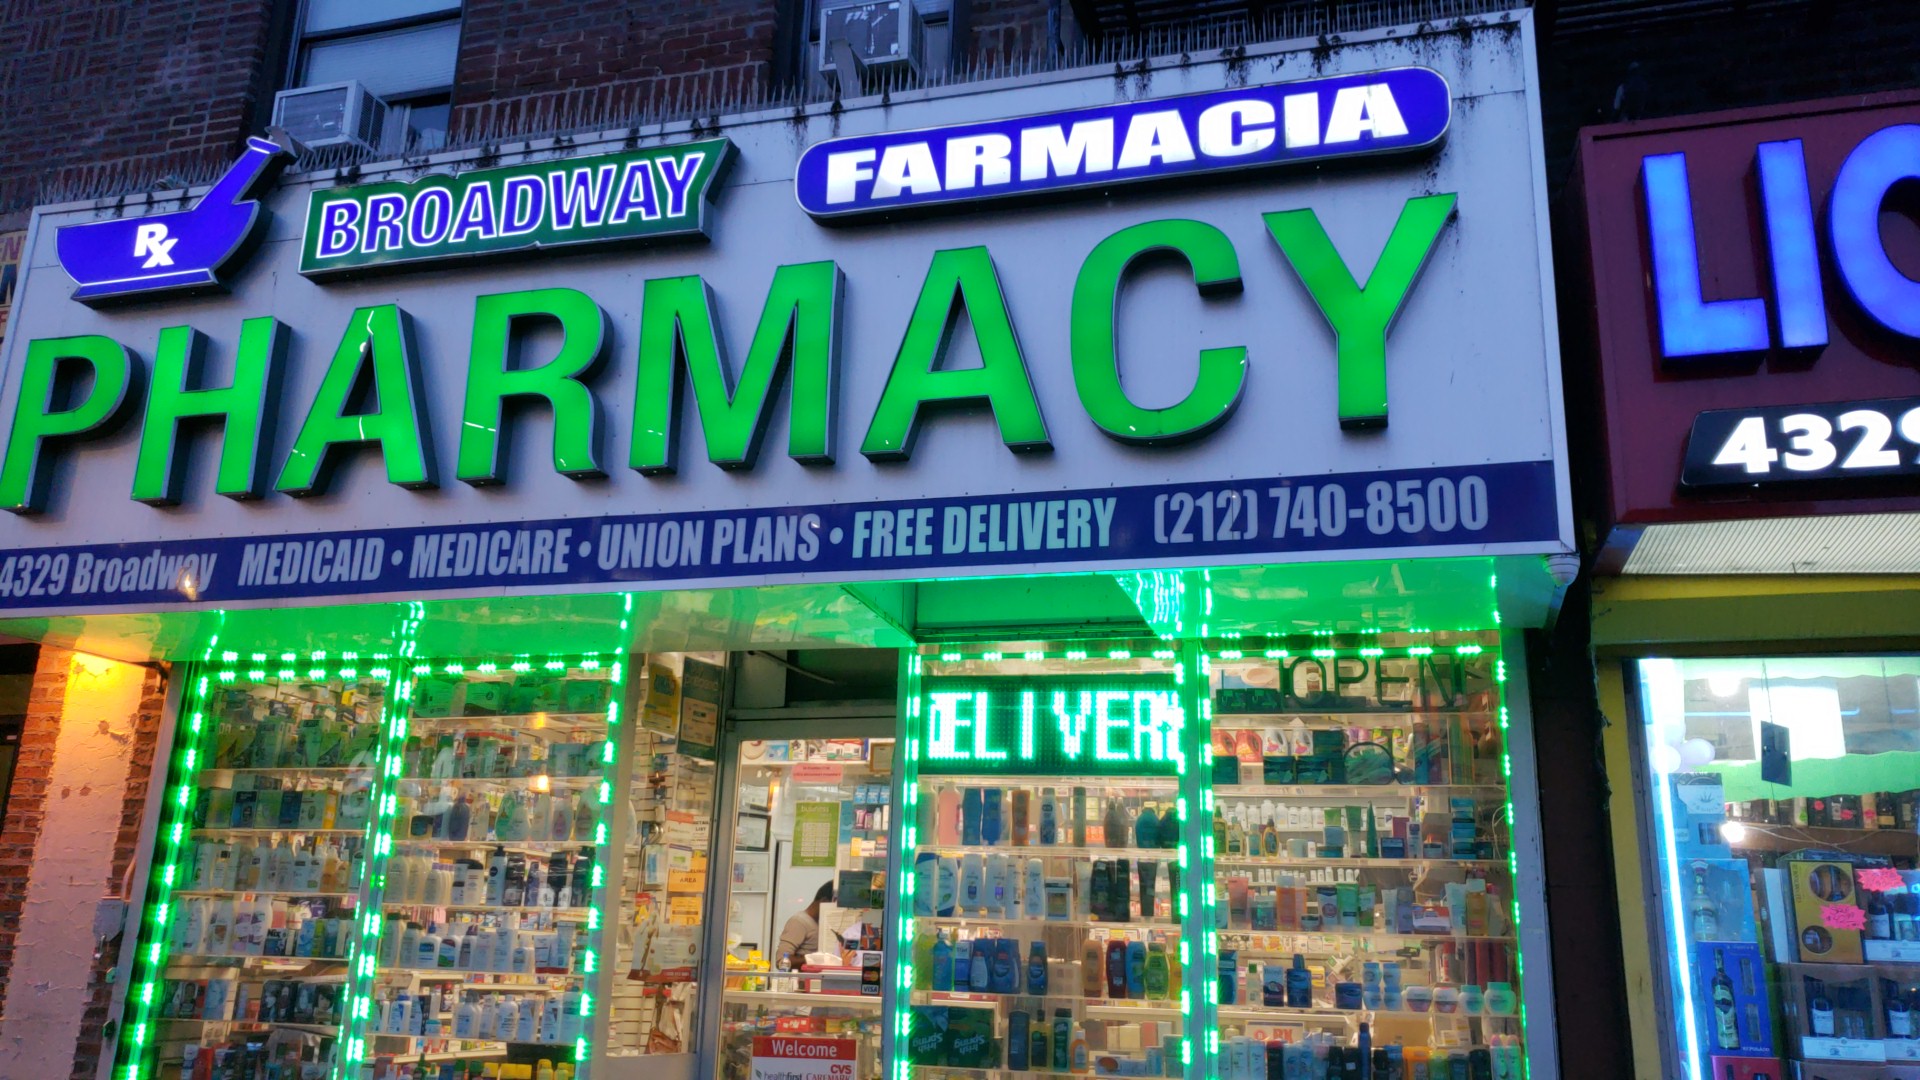 Broadway Pharmacy & Surgical